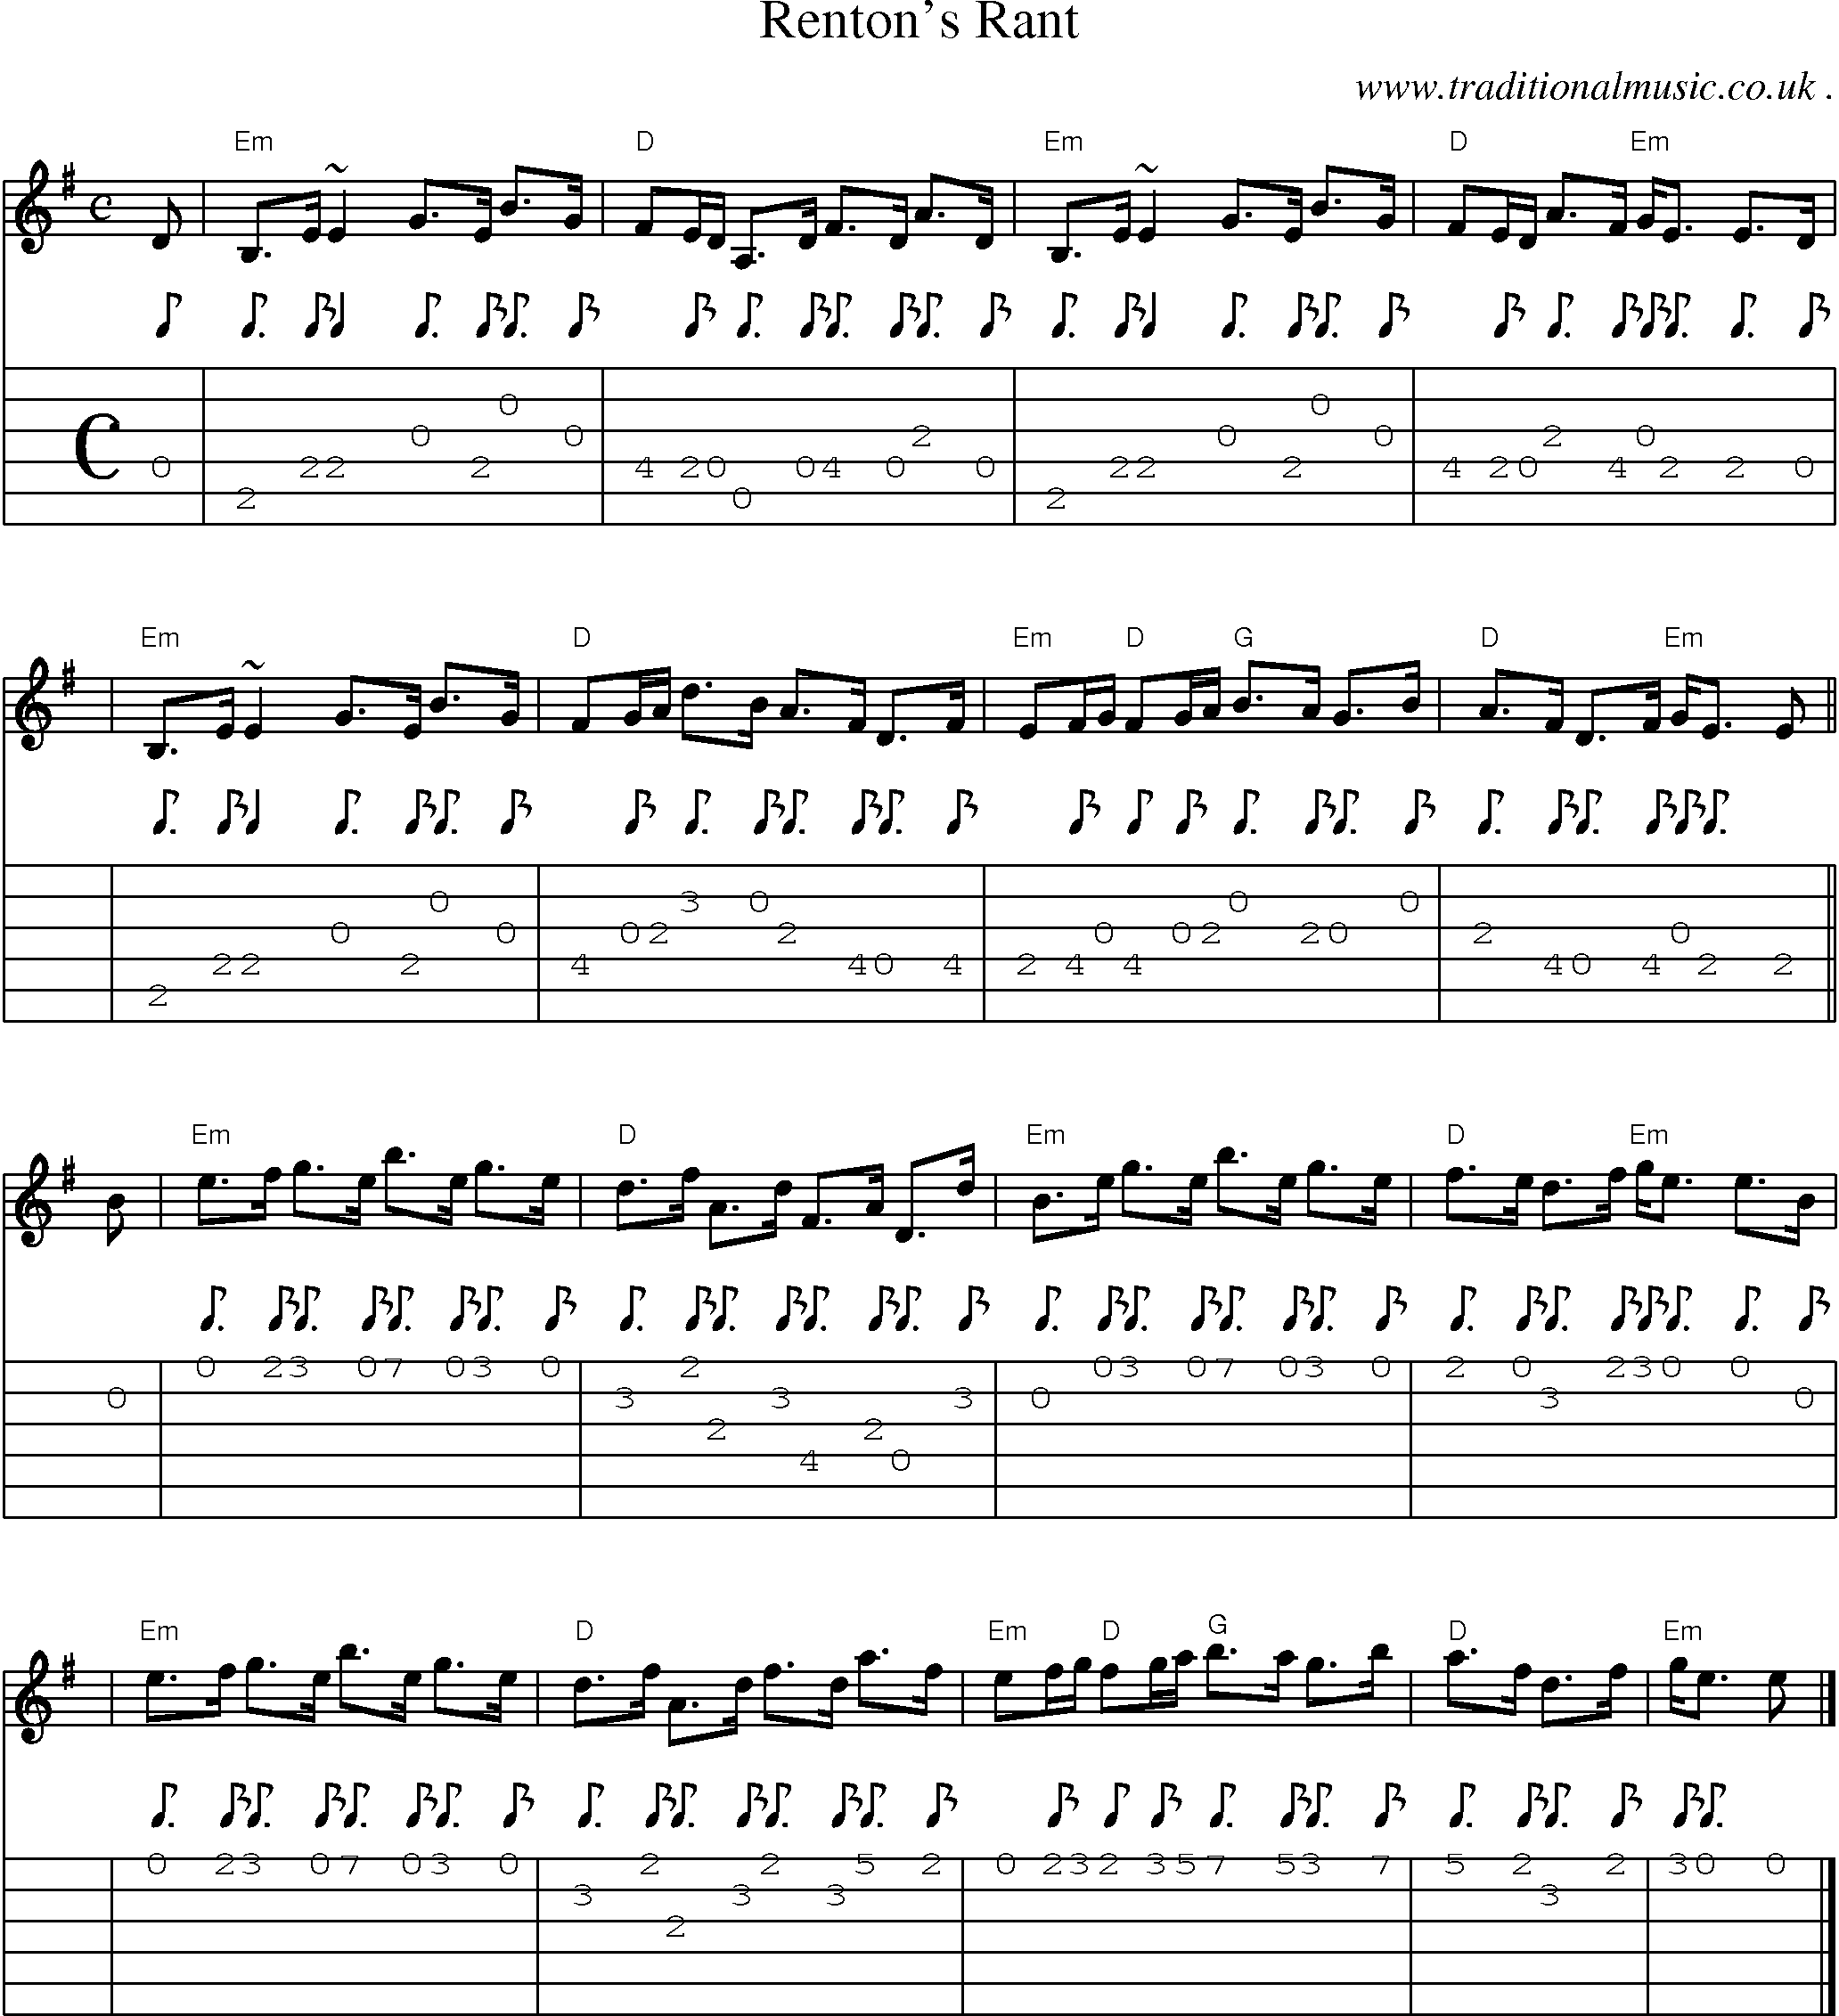 Sheet-music  score, Chords and Guitar Tabs for Rentons Rant